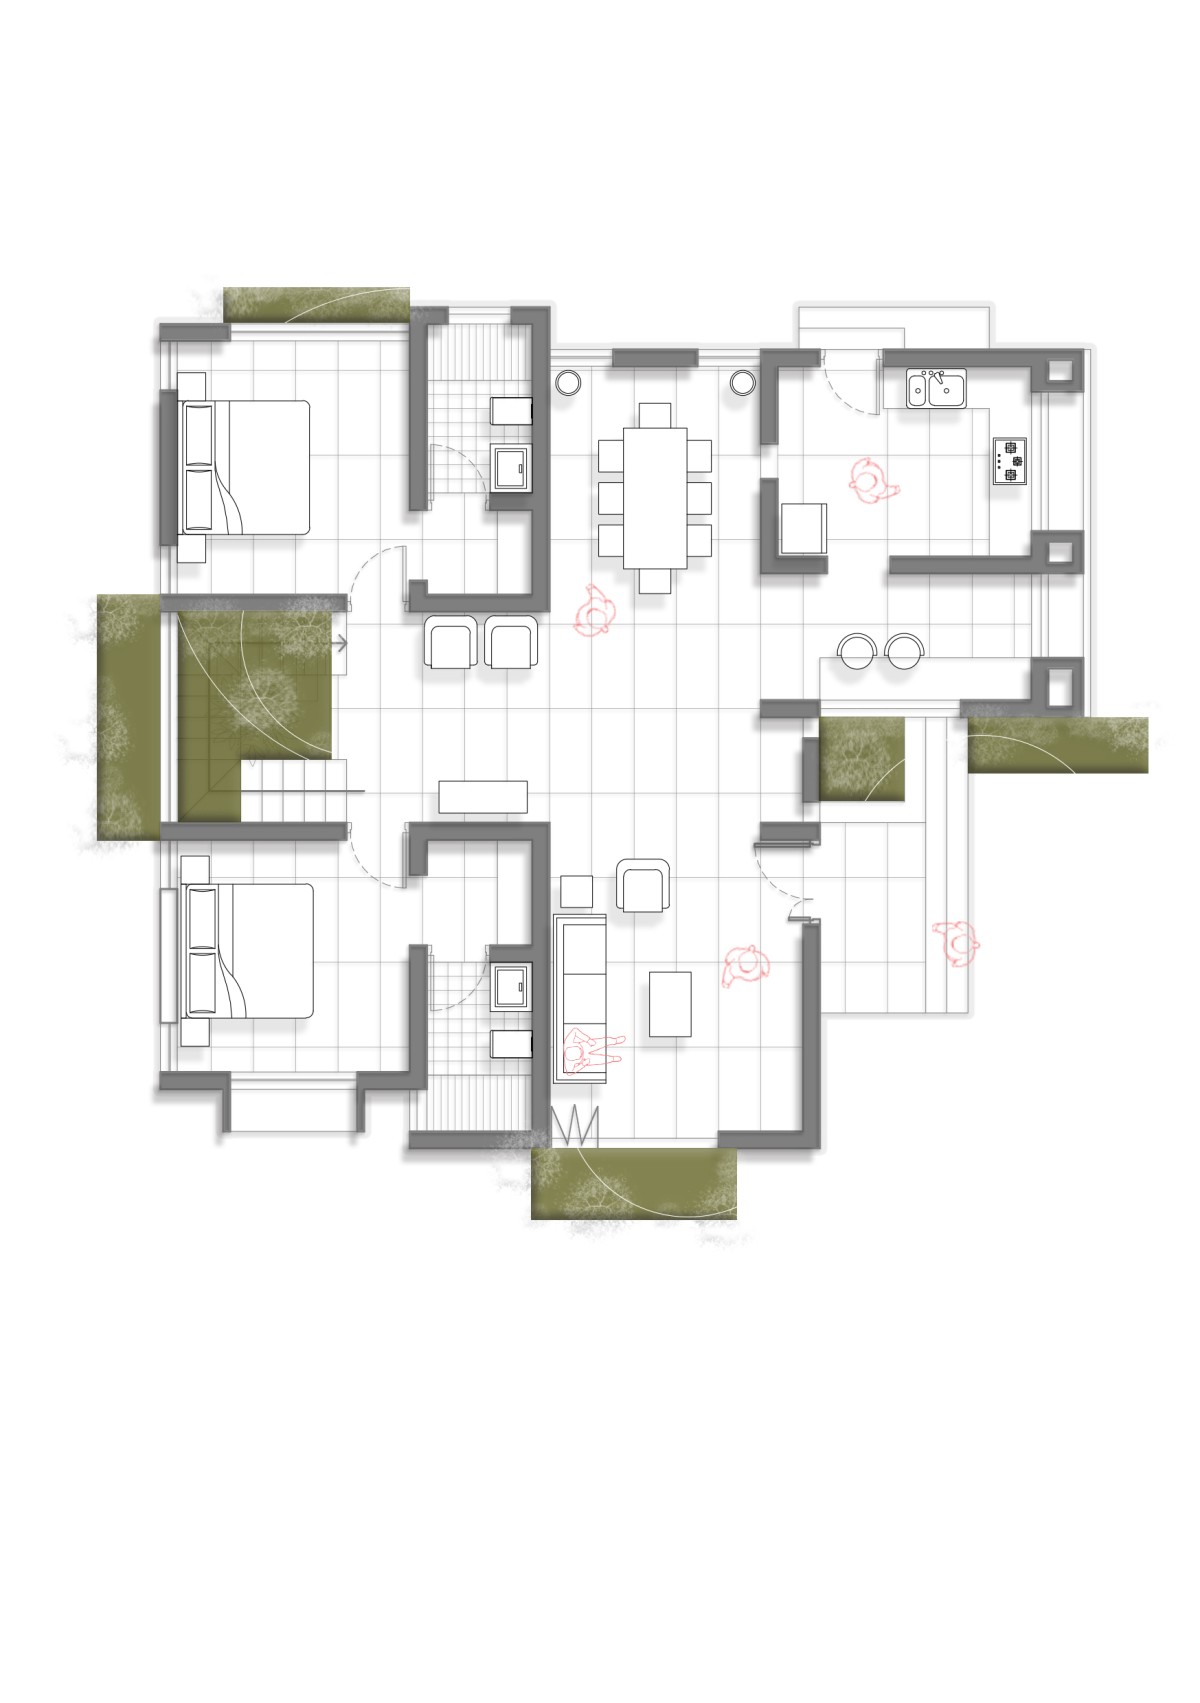 Ground floor plan of Inward House by Archstation Architecture